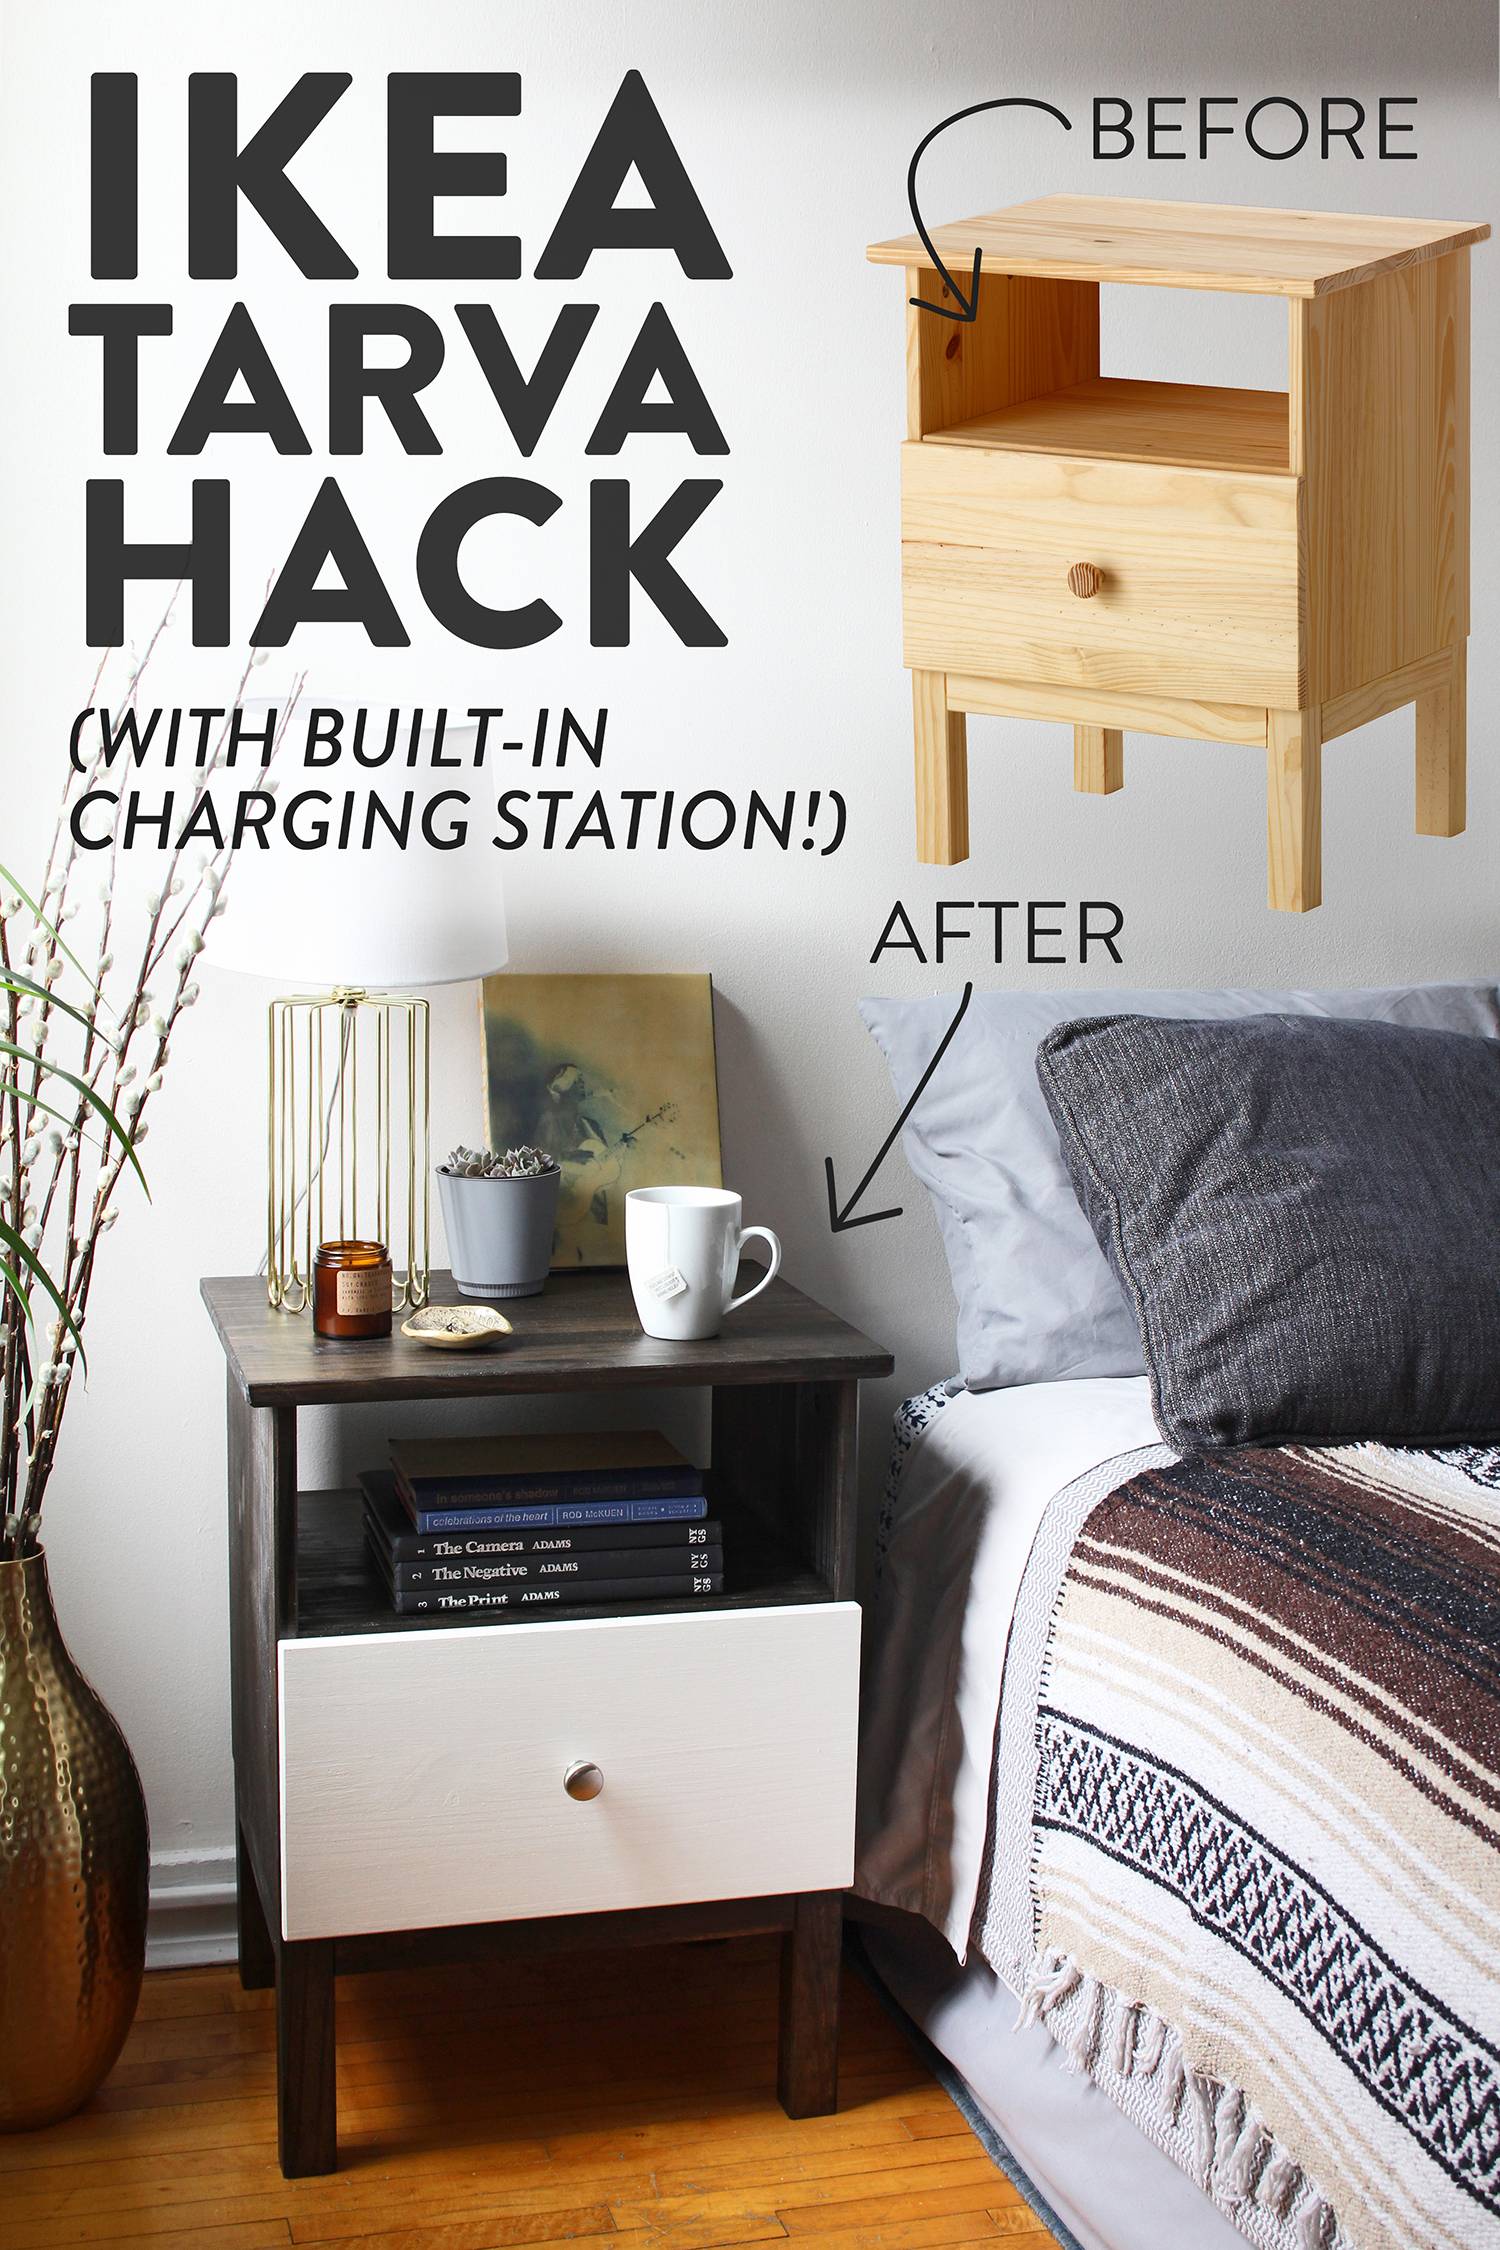 IKEA Hack With a Built-In Charging Station! Transform the Tarva nightstand with wood stain and paint for a fresh new look.